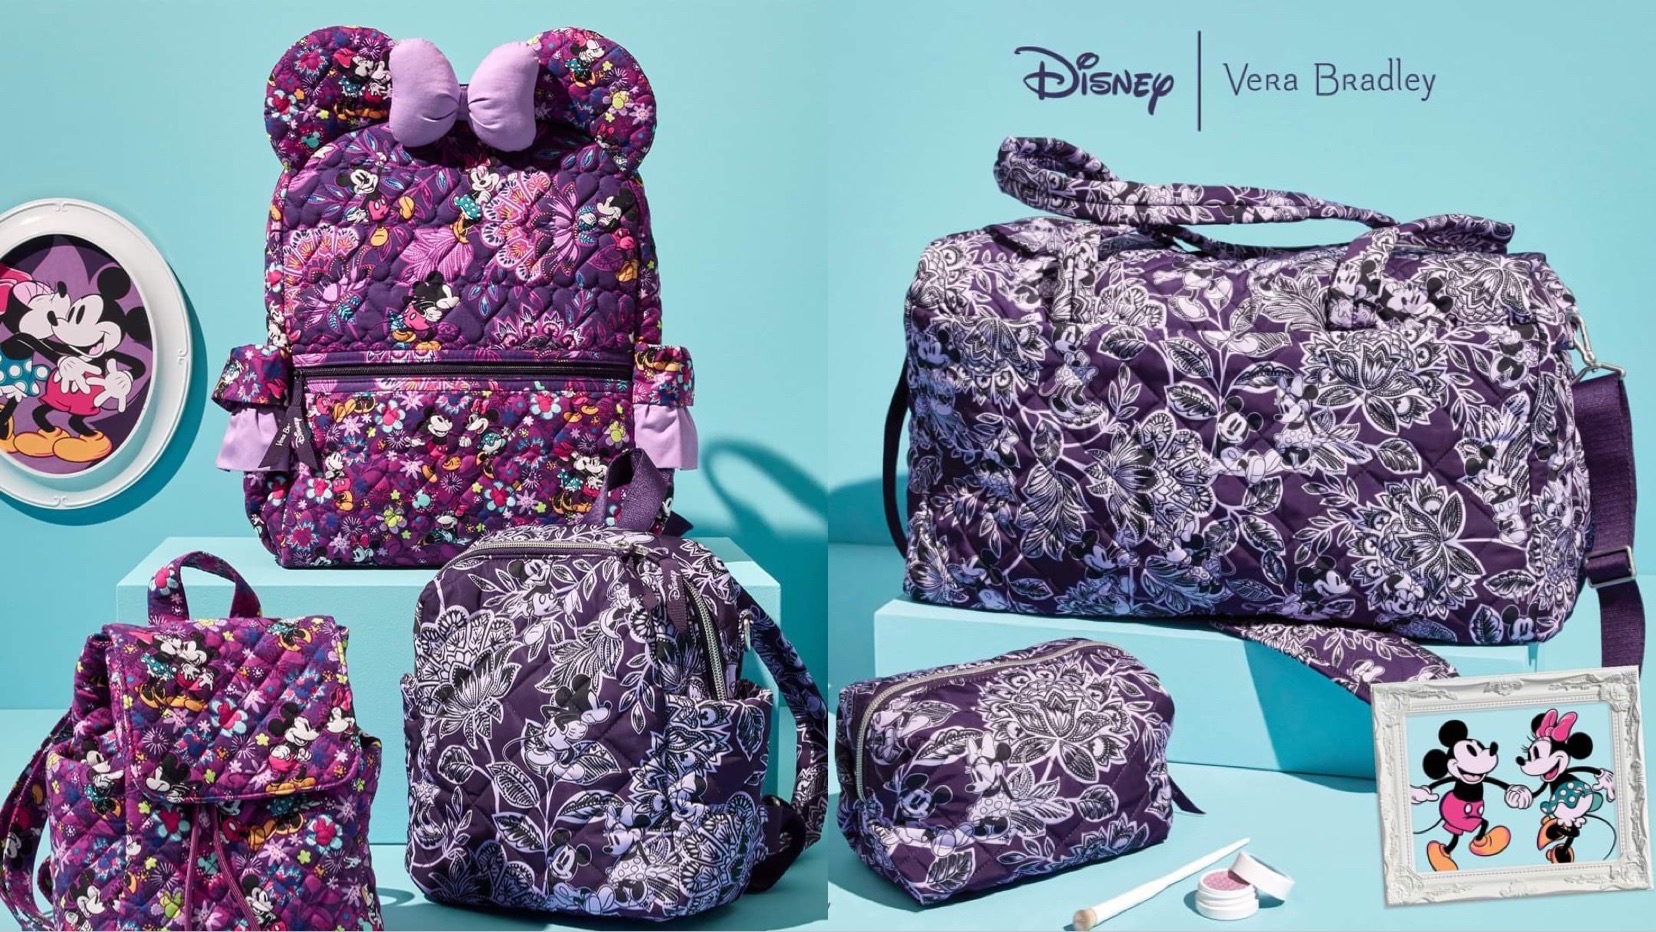 New Disney Mickey & Minnie's Flirty Floral Collection From Vera